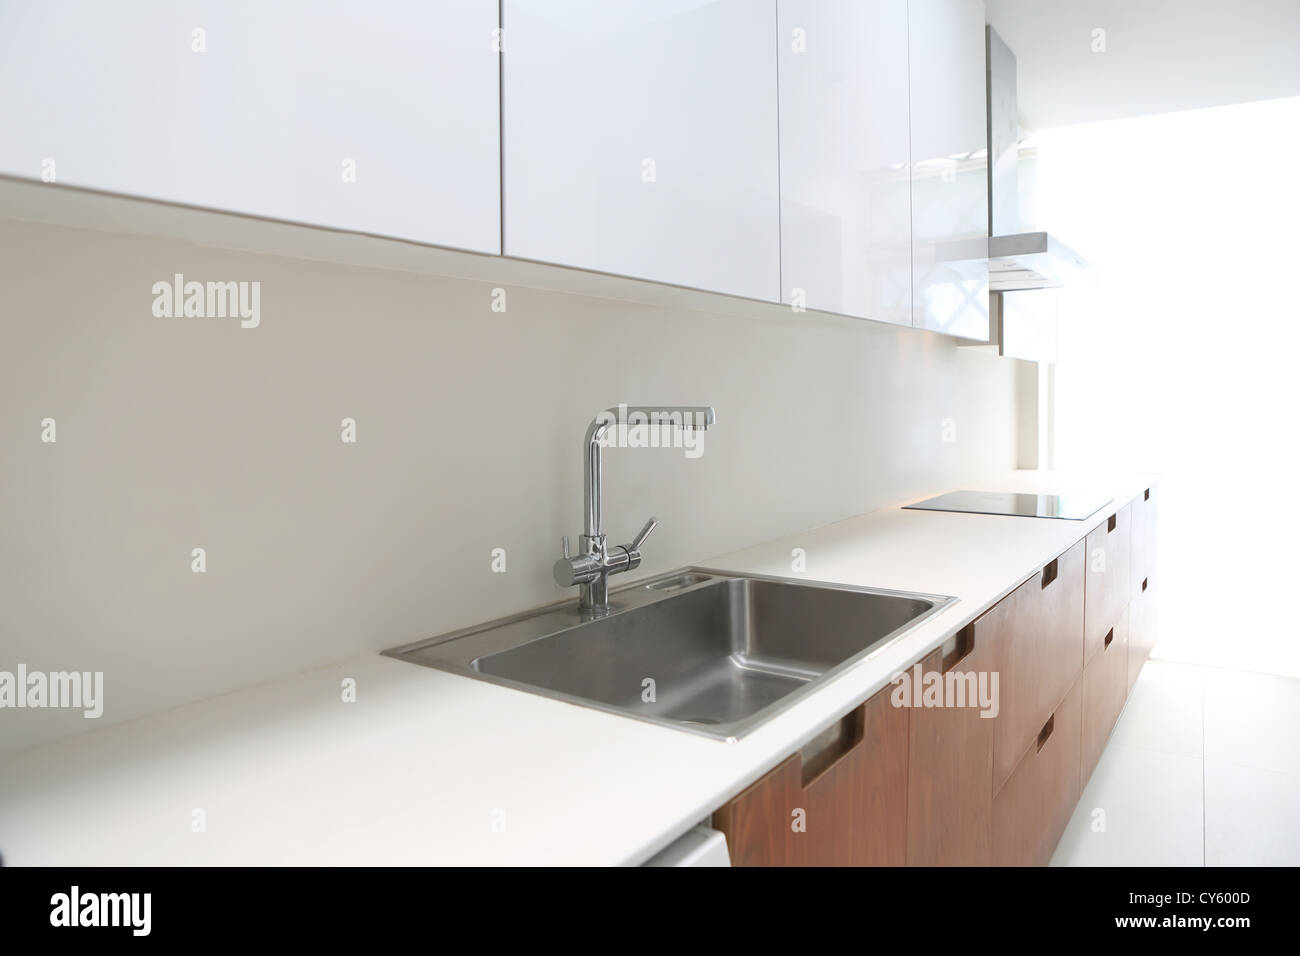 Actual modern kitchen in white and walnut wood interior house Stock Photo